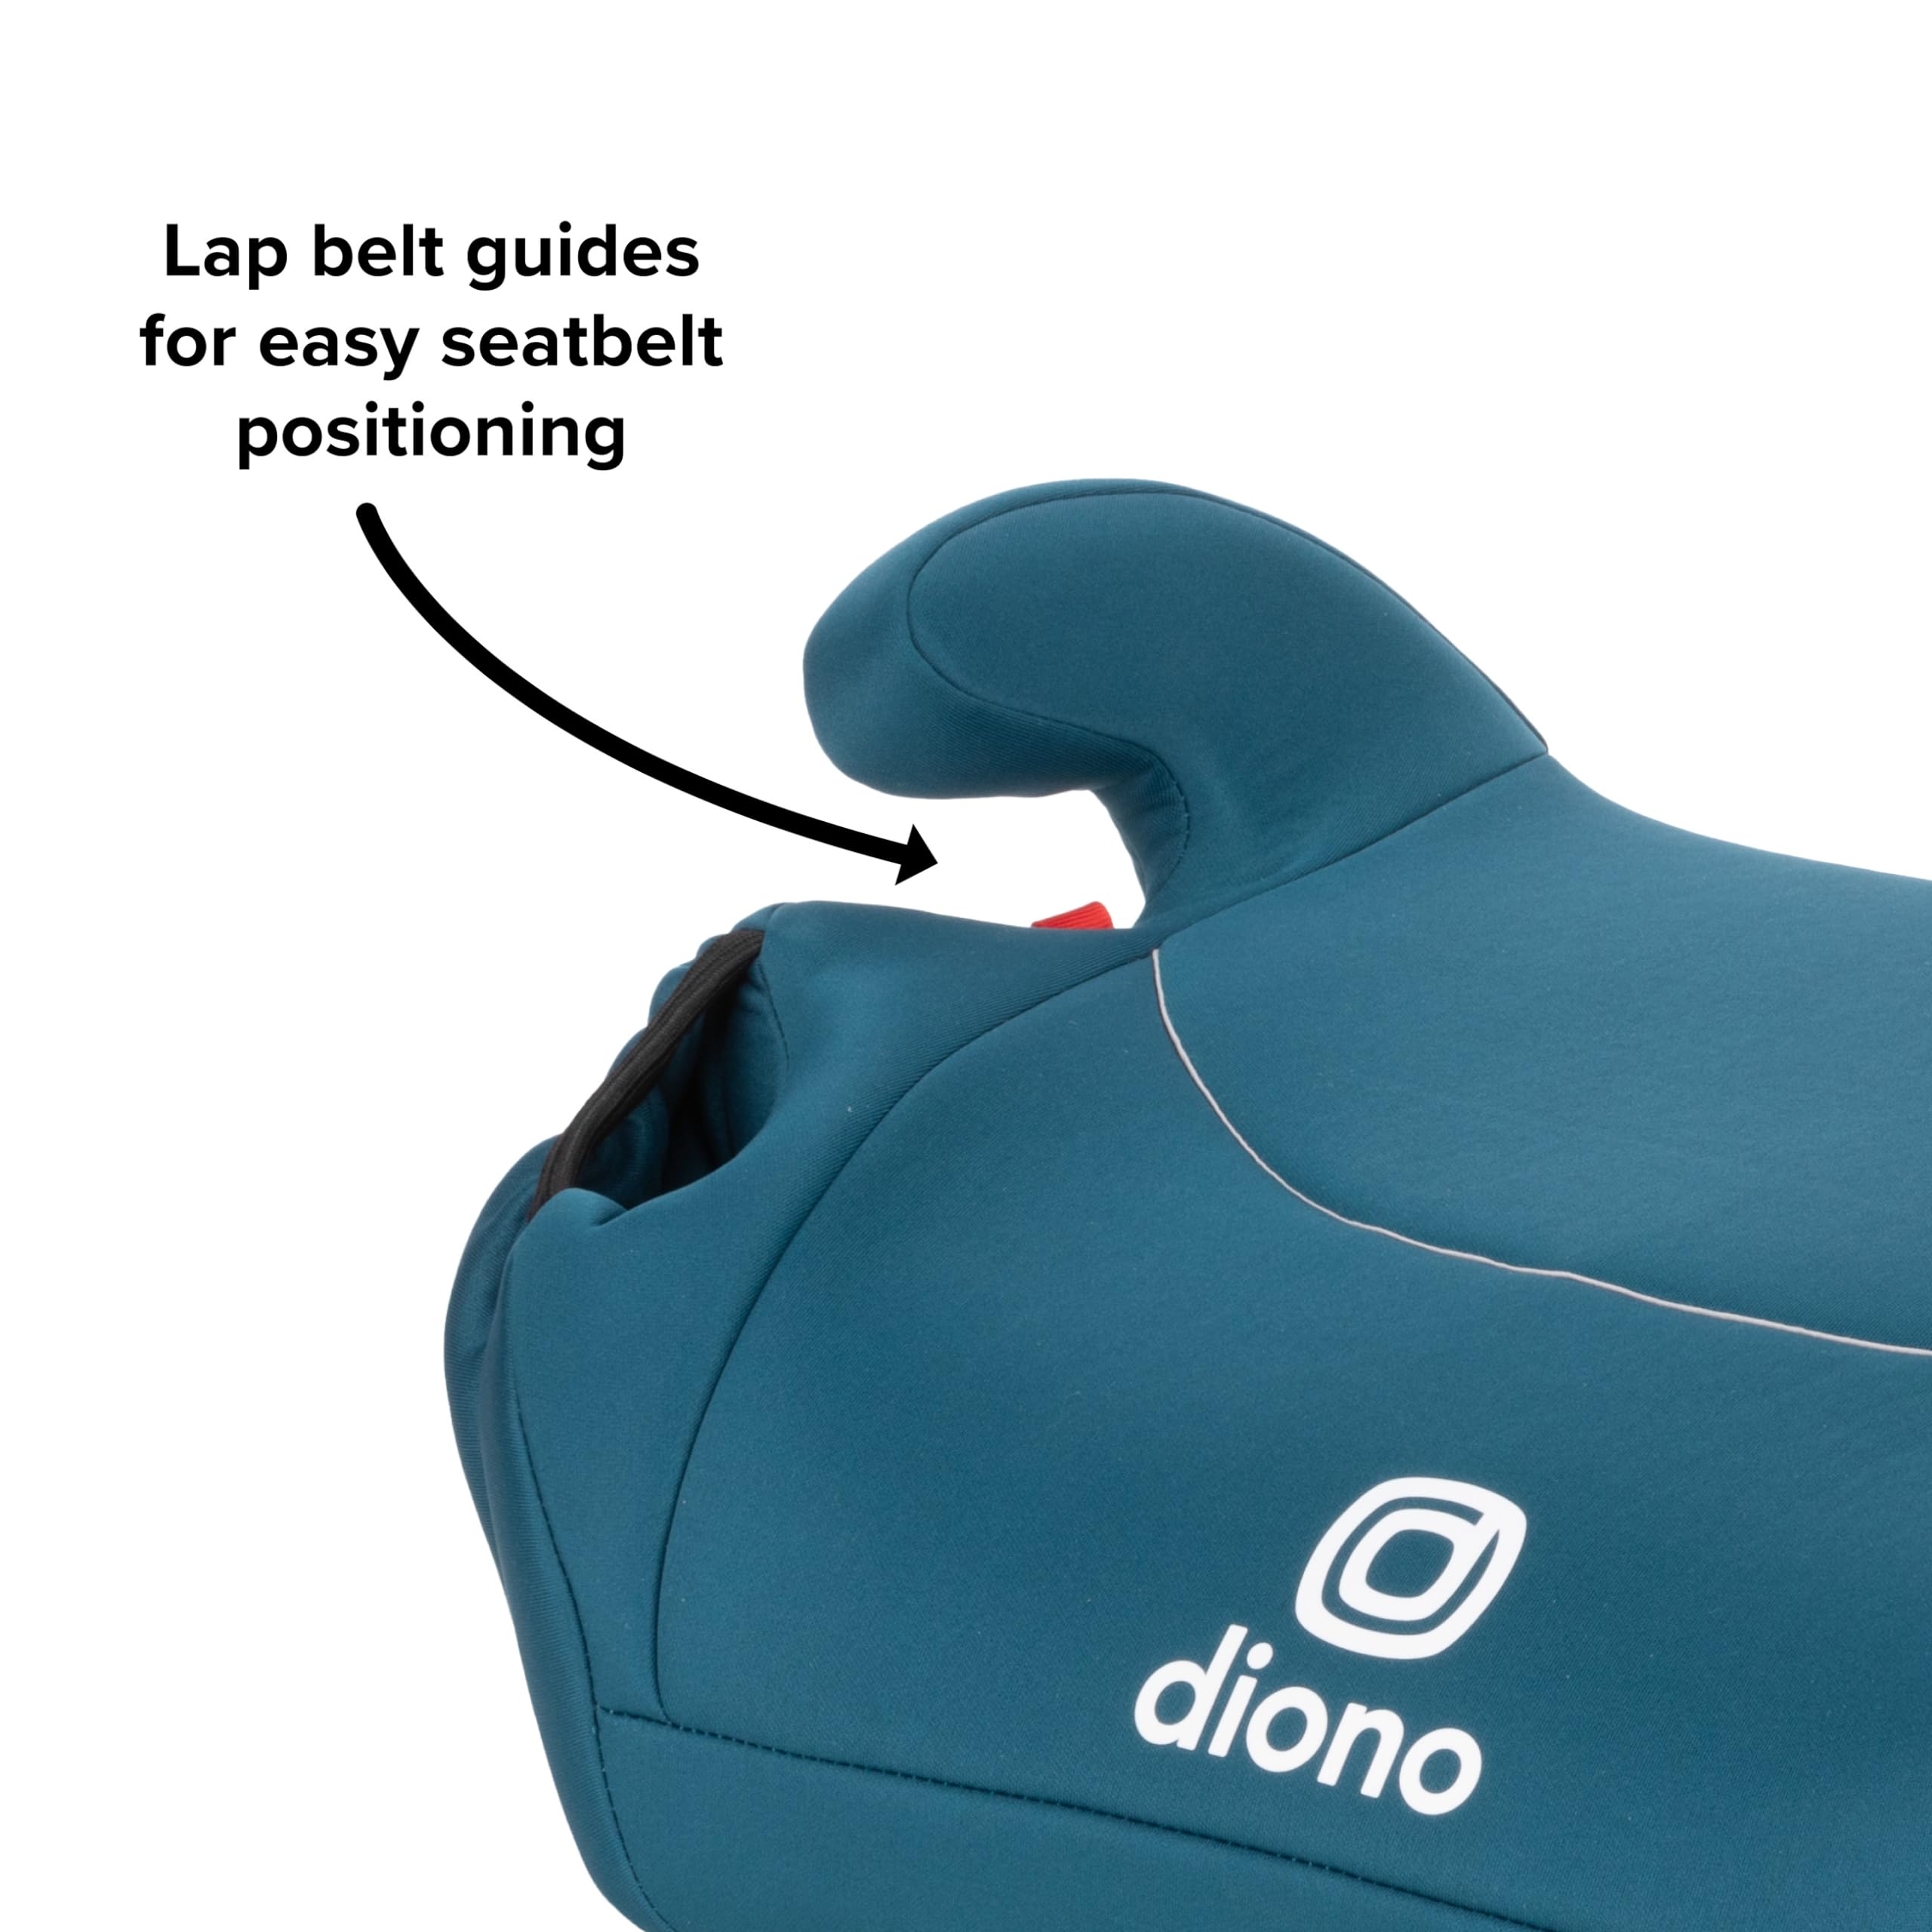 Diono Solana, No Latch, Pack of 2 Backless Booster Car Seats, Lightweight, Machine Washable Covers, Cup Holders, Black/Blue Razz Ice